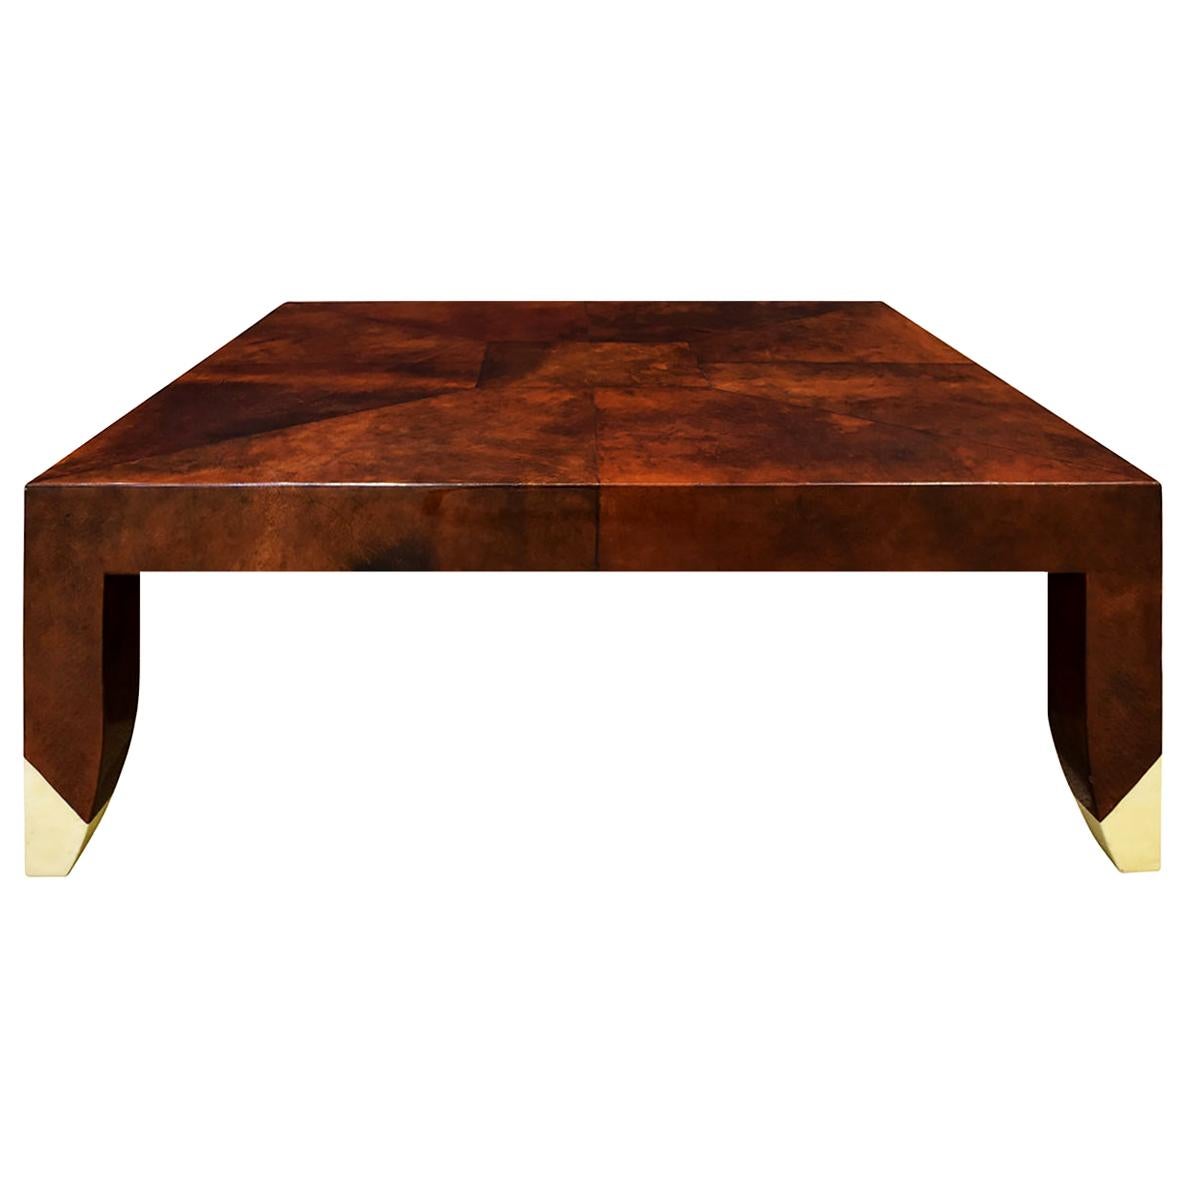 Karl Springer "Bristol Coffee Table" in Lacquered Goatskin circa 1990 'Signed' For Sale